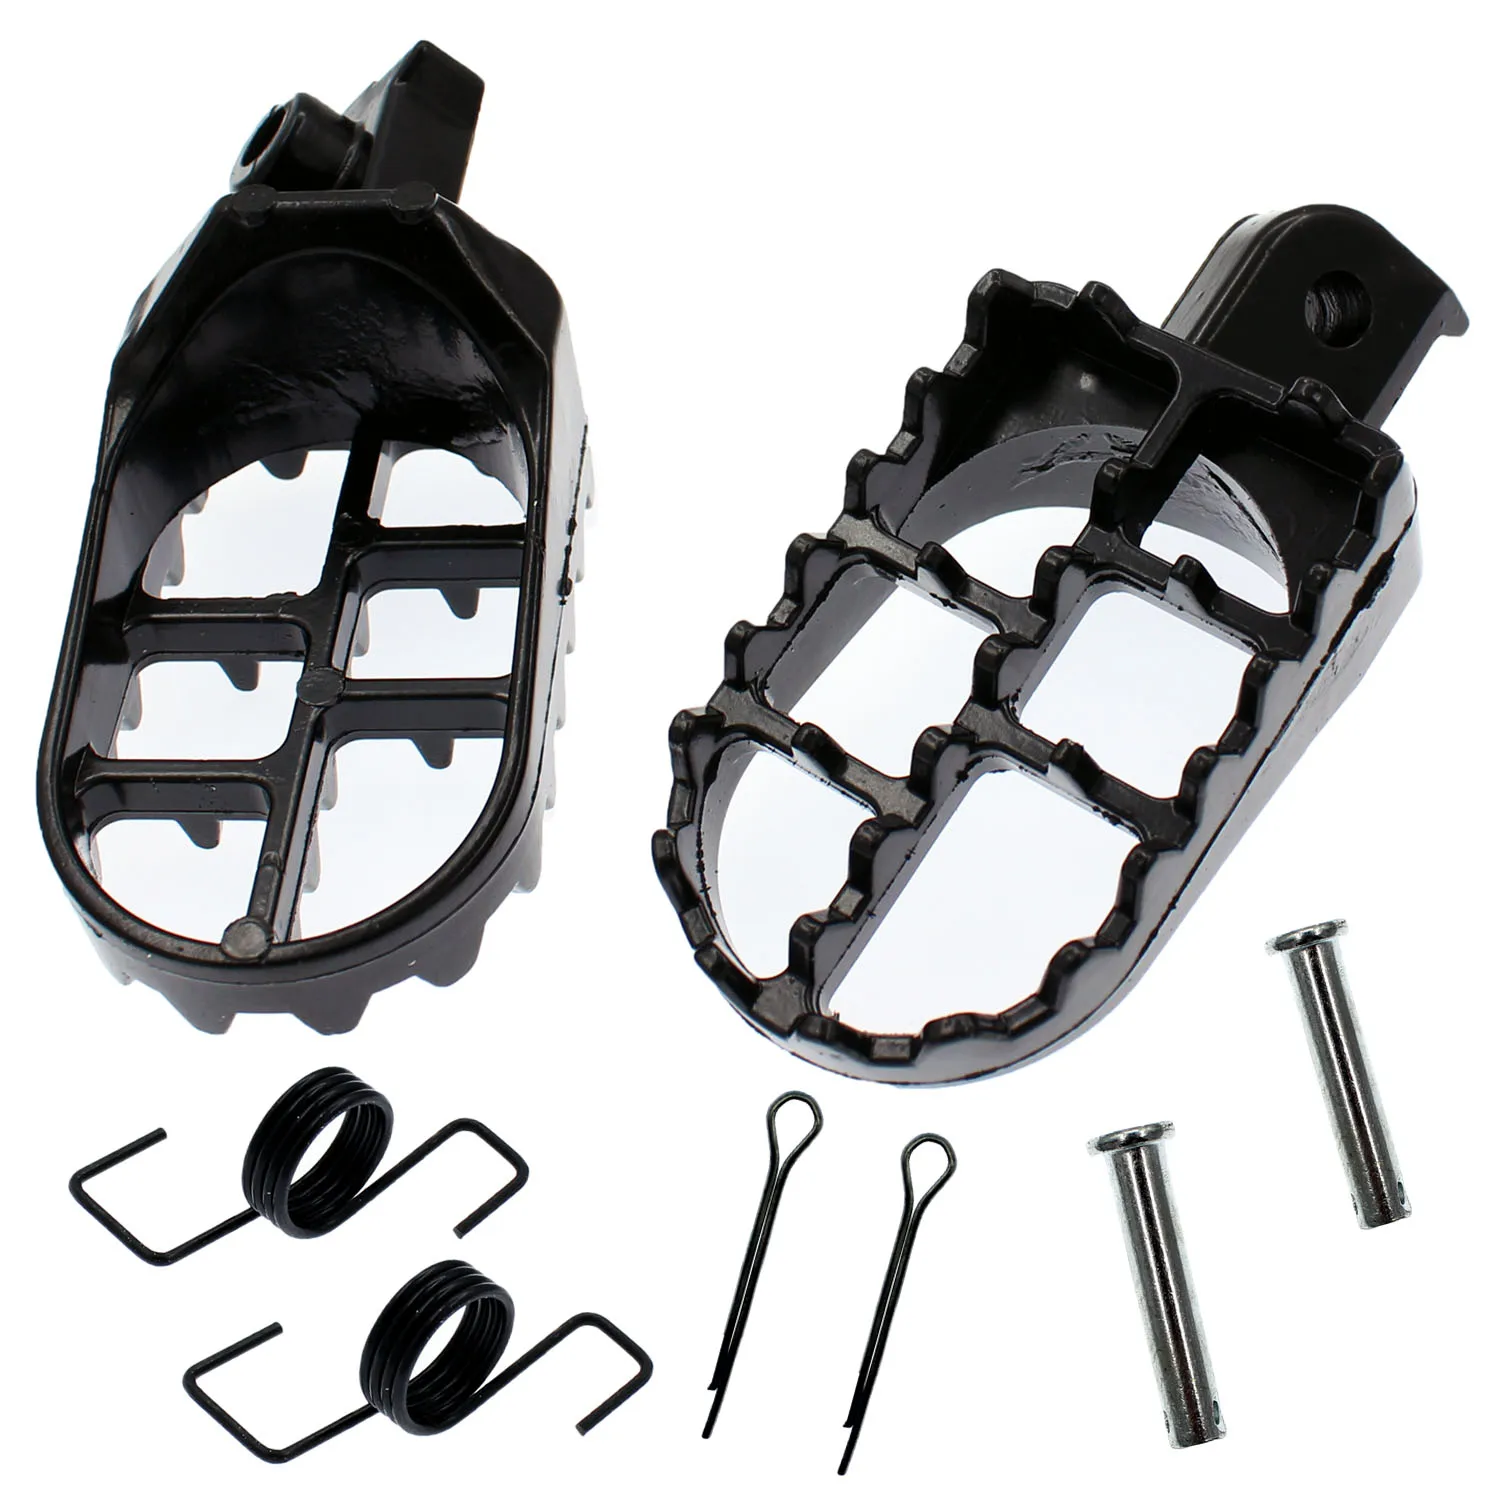 Foot Pegs Rest Footpegs Yamaha PW50 PW80 BW80 DT50 RT100 RT180 T225S TT225T - $22.75+